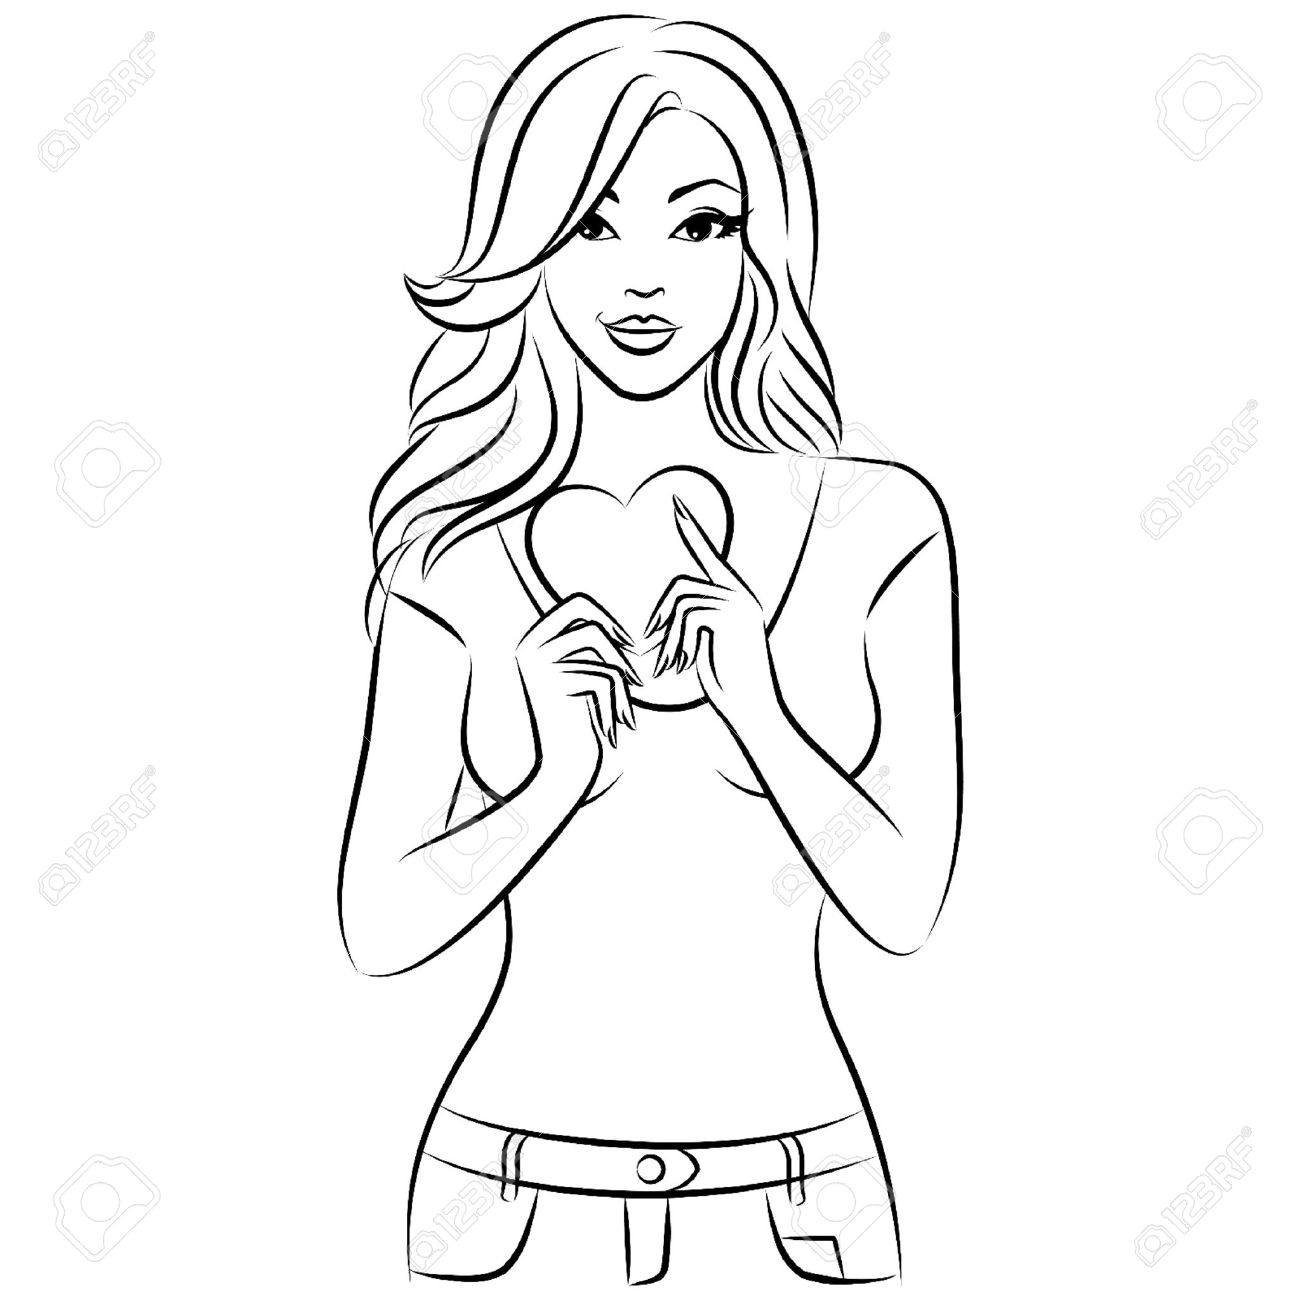 Women Clipart Black And White. Vector - Vector beautiful girl .